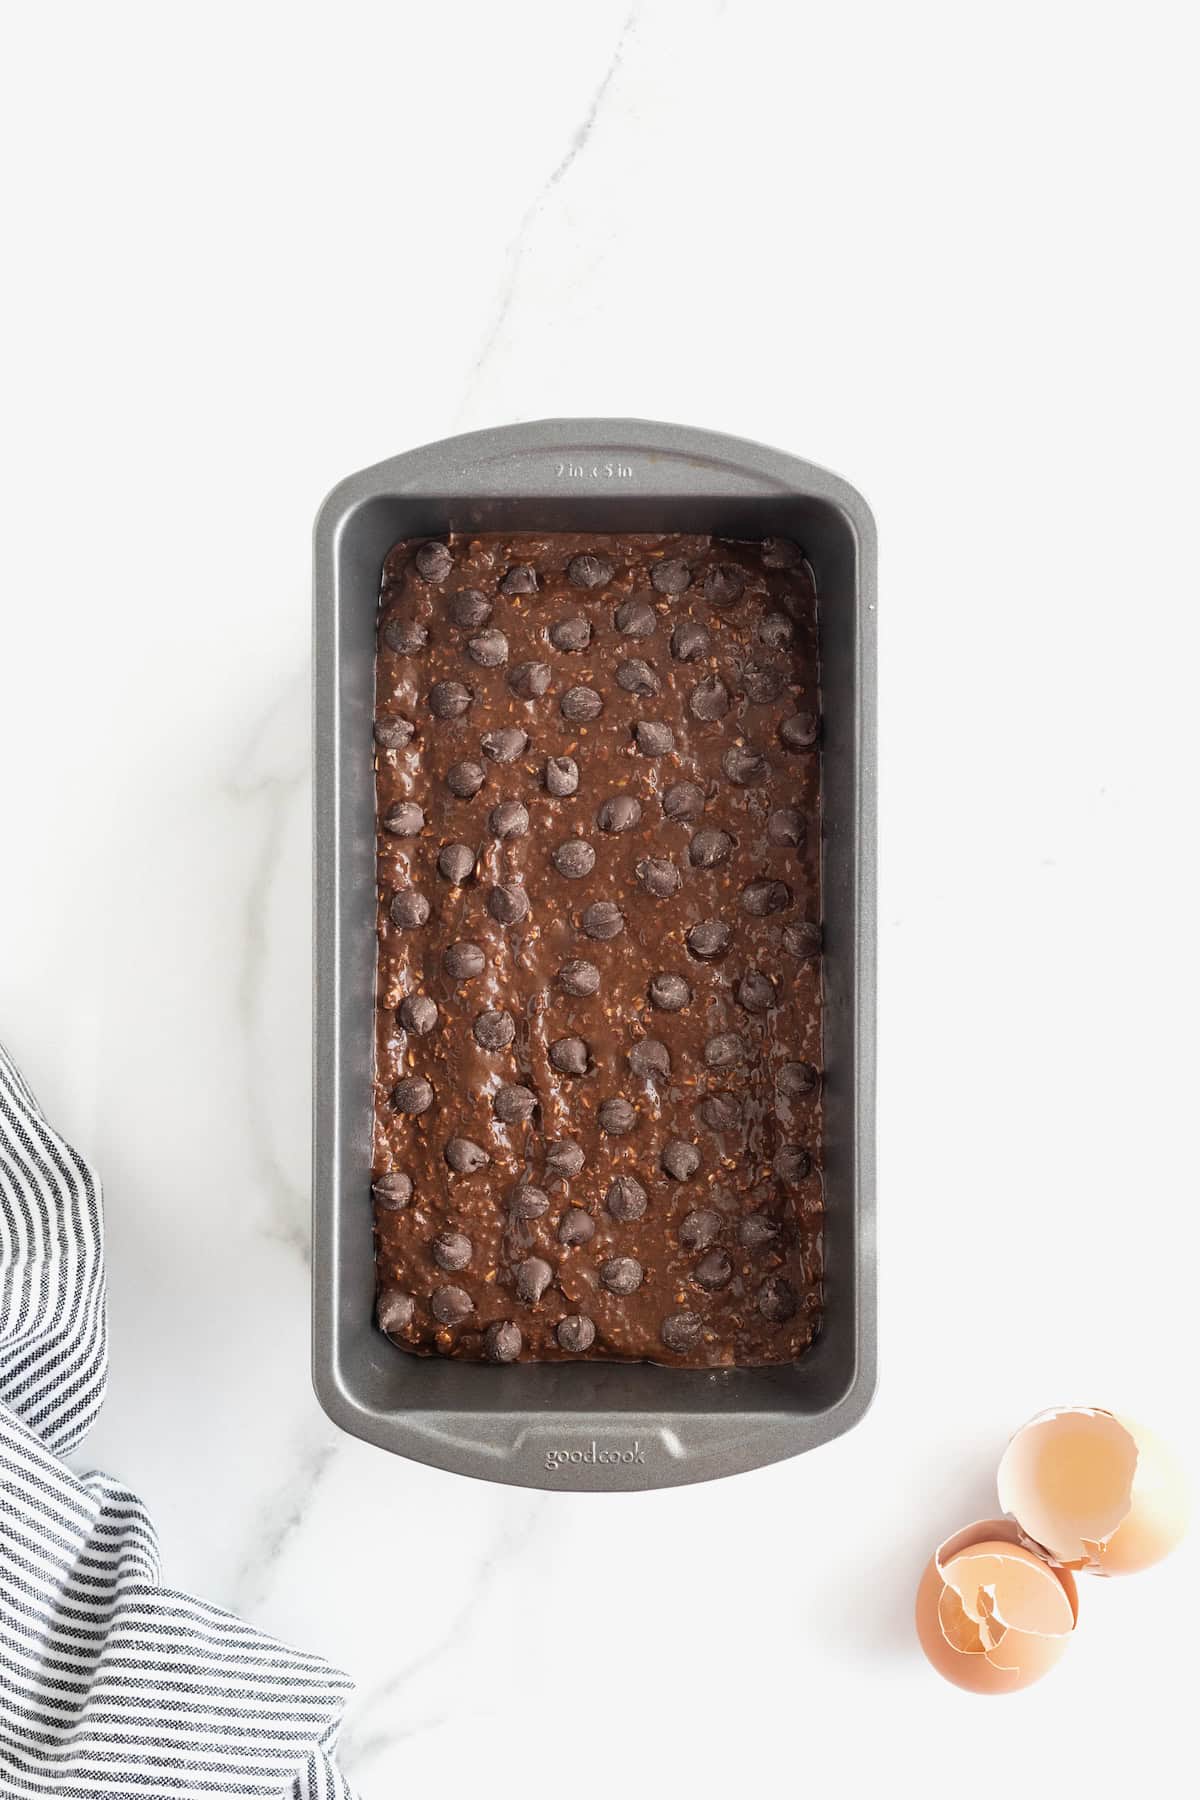 Chocolate banana bread batter topped with chocolate chips in a dark aluminum loaf pan.